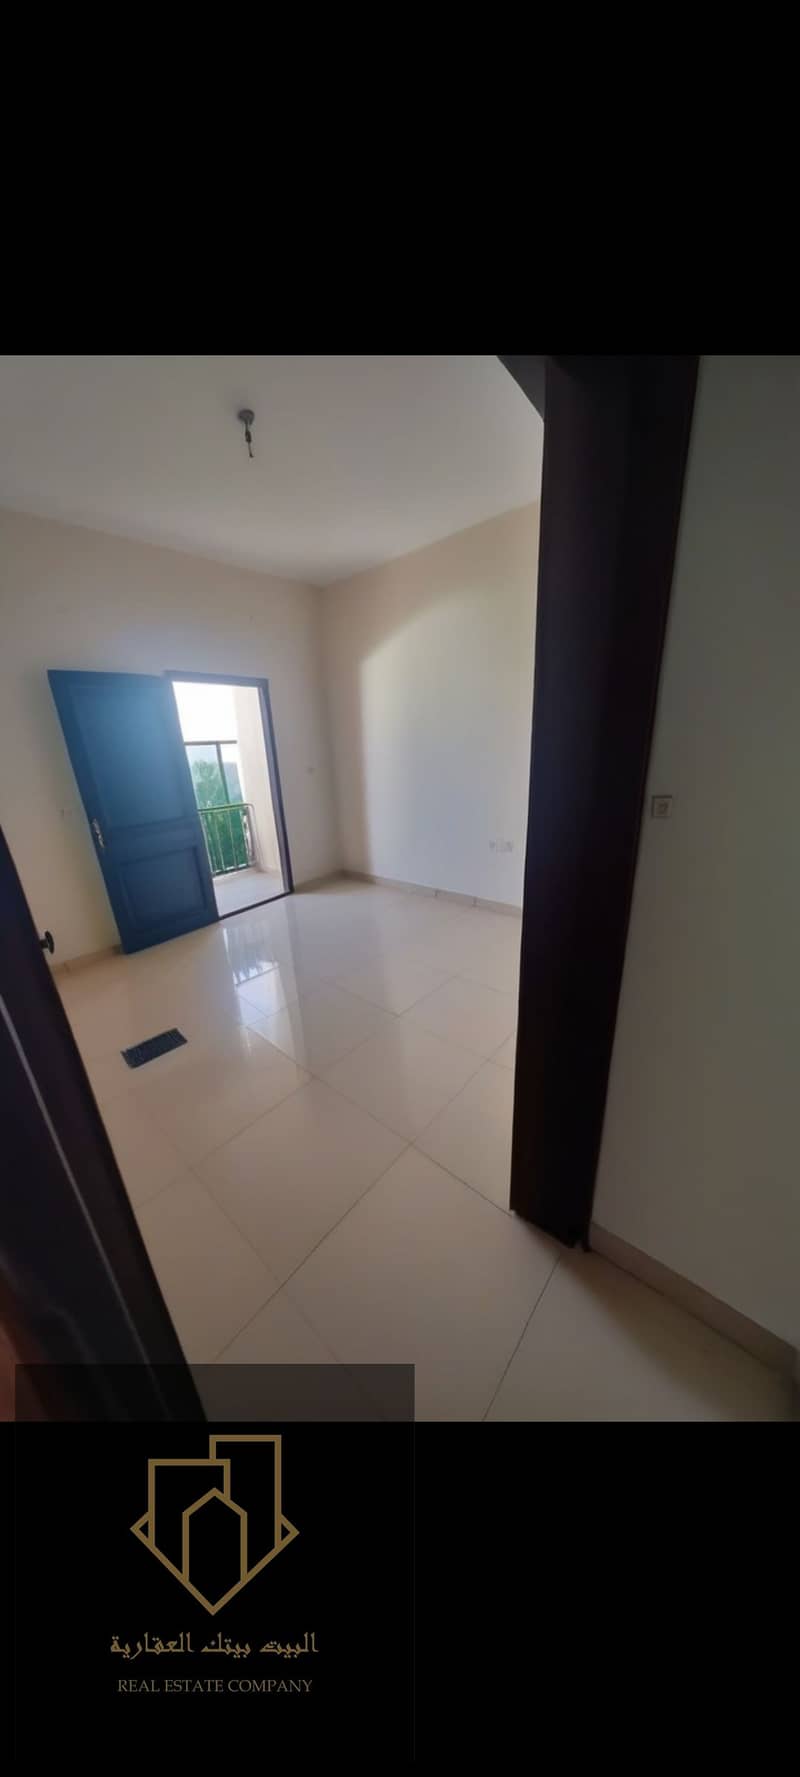 Enjoy living in a centrally located apartment close to all public and private services. The apartment guarantees you easy movement to all exits to Sharjah and Dubai